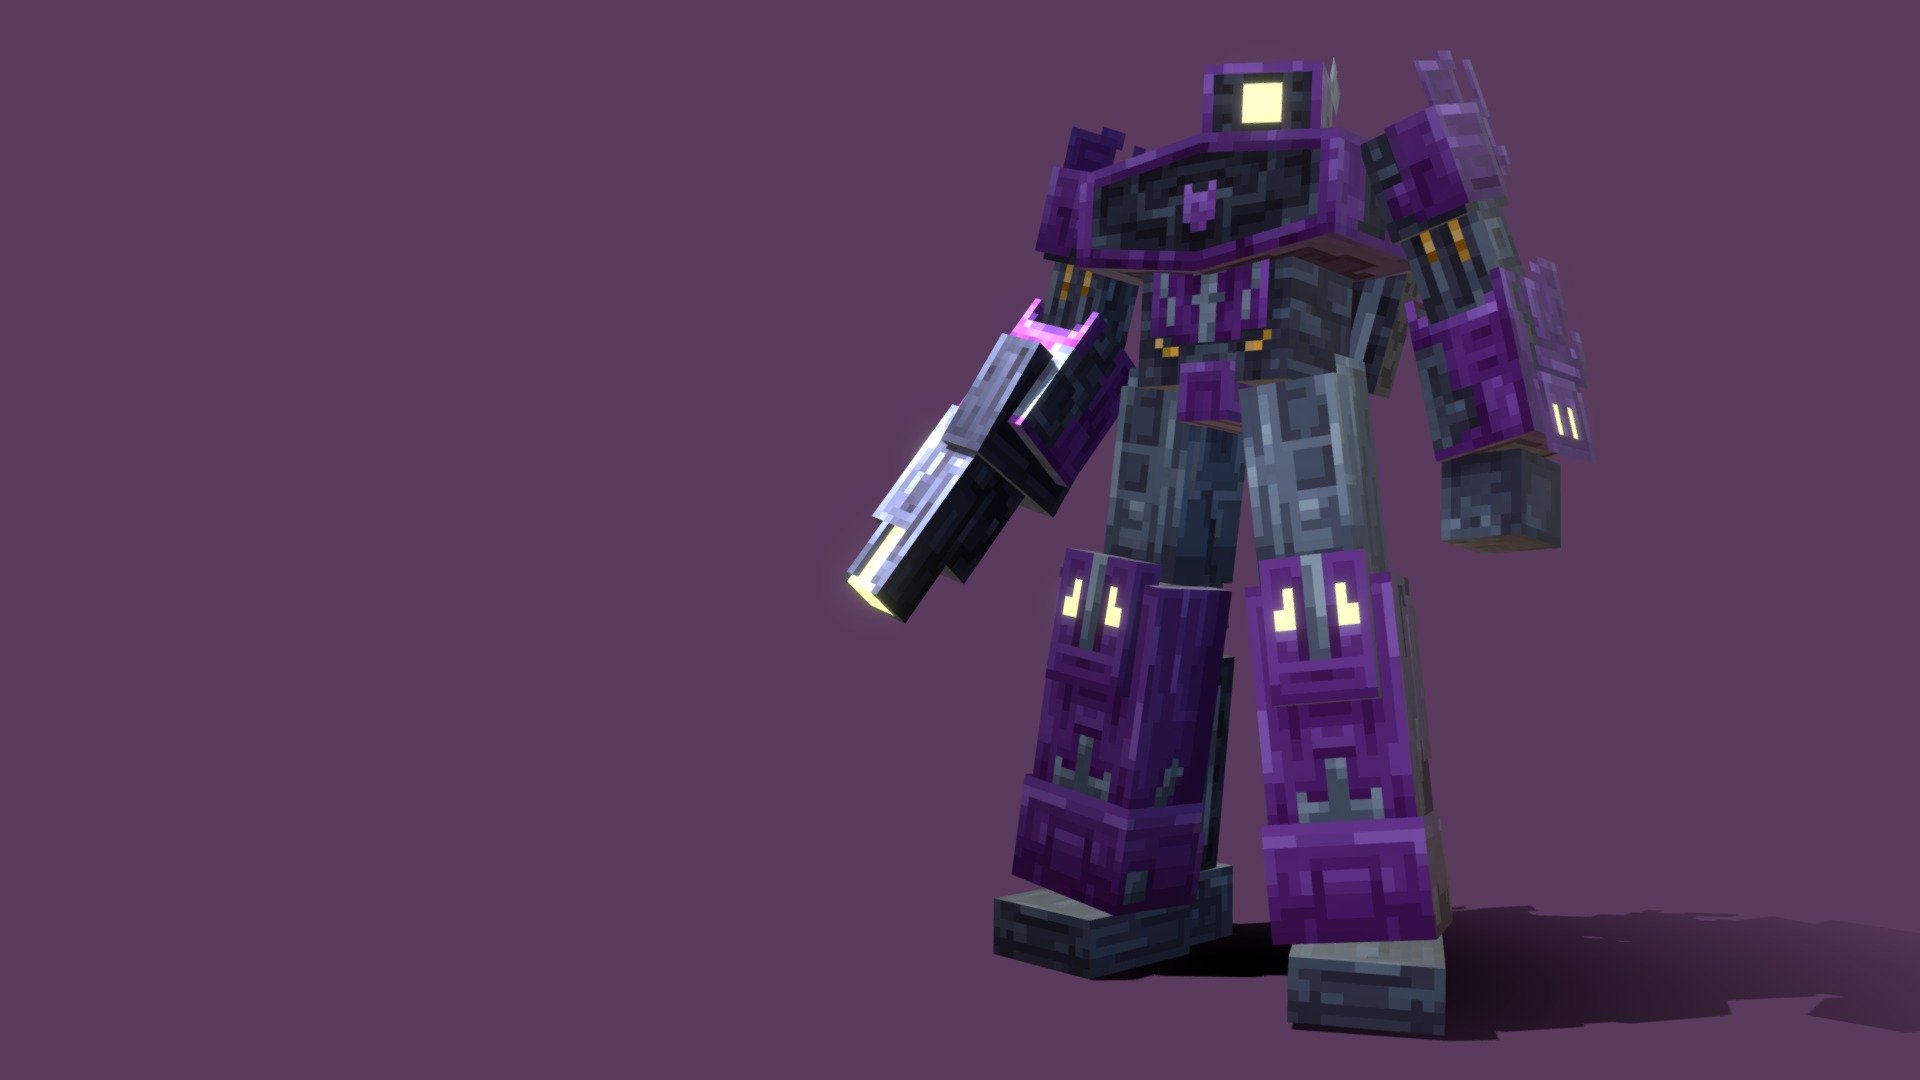 Transformers' Shockwave in a low-poly and Minecrafty style
Made in bockbench - Shockwave - 3D model by Natzival 3d model